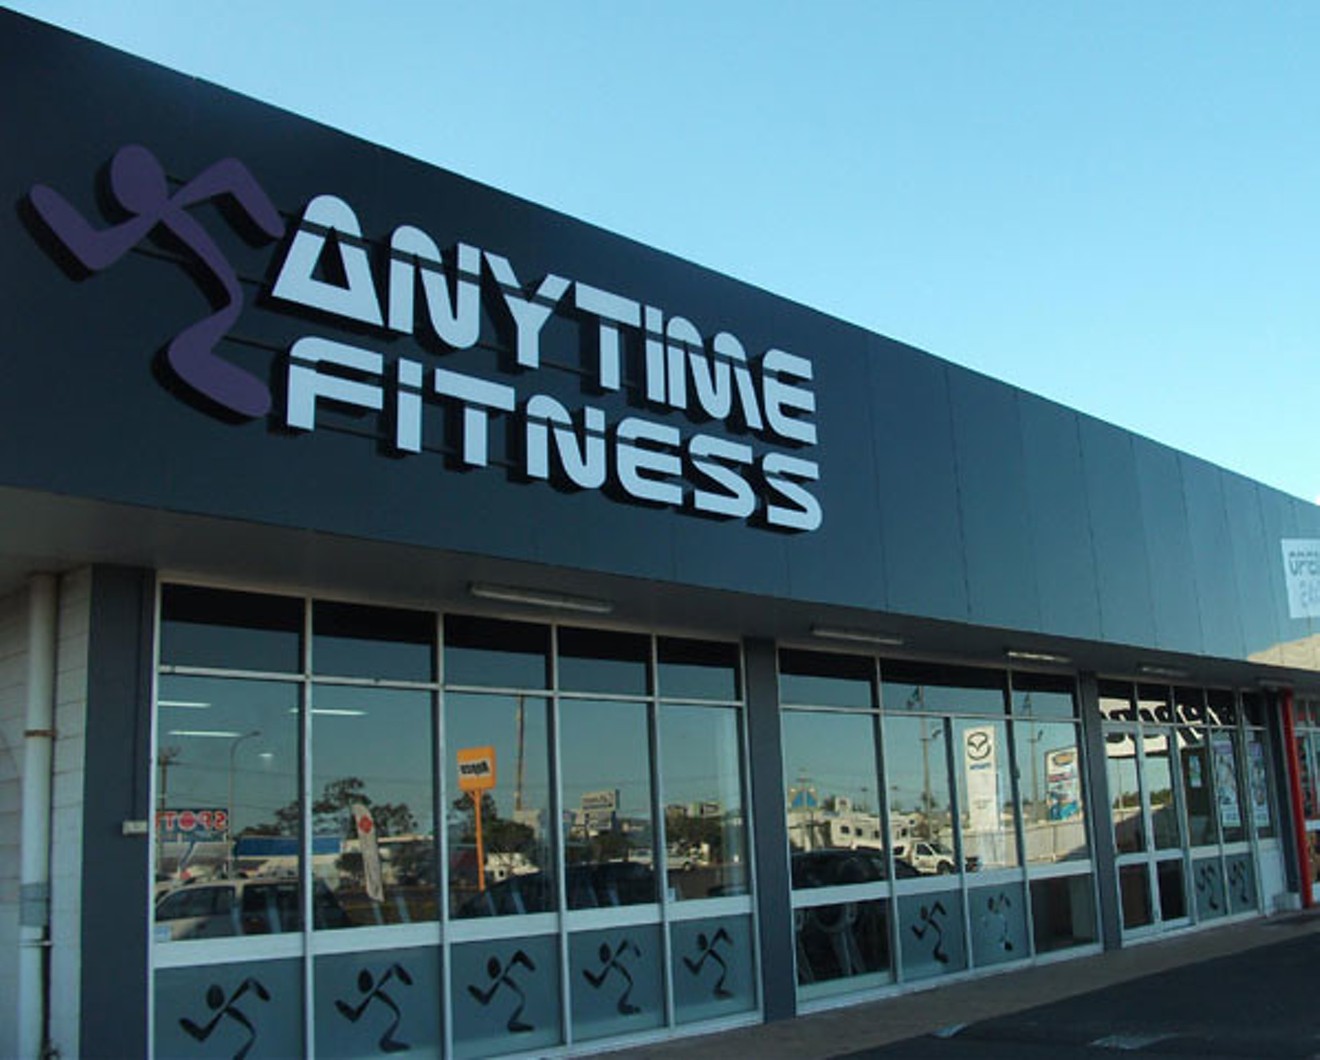 An Anytime Fitness franchise